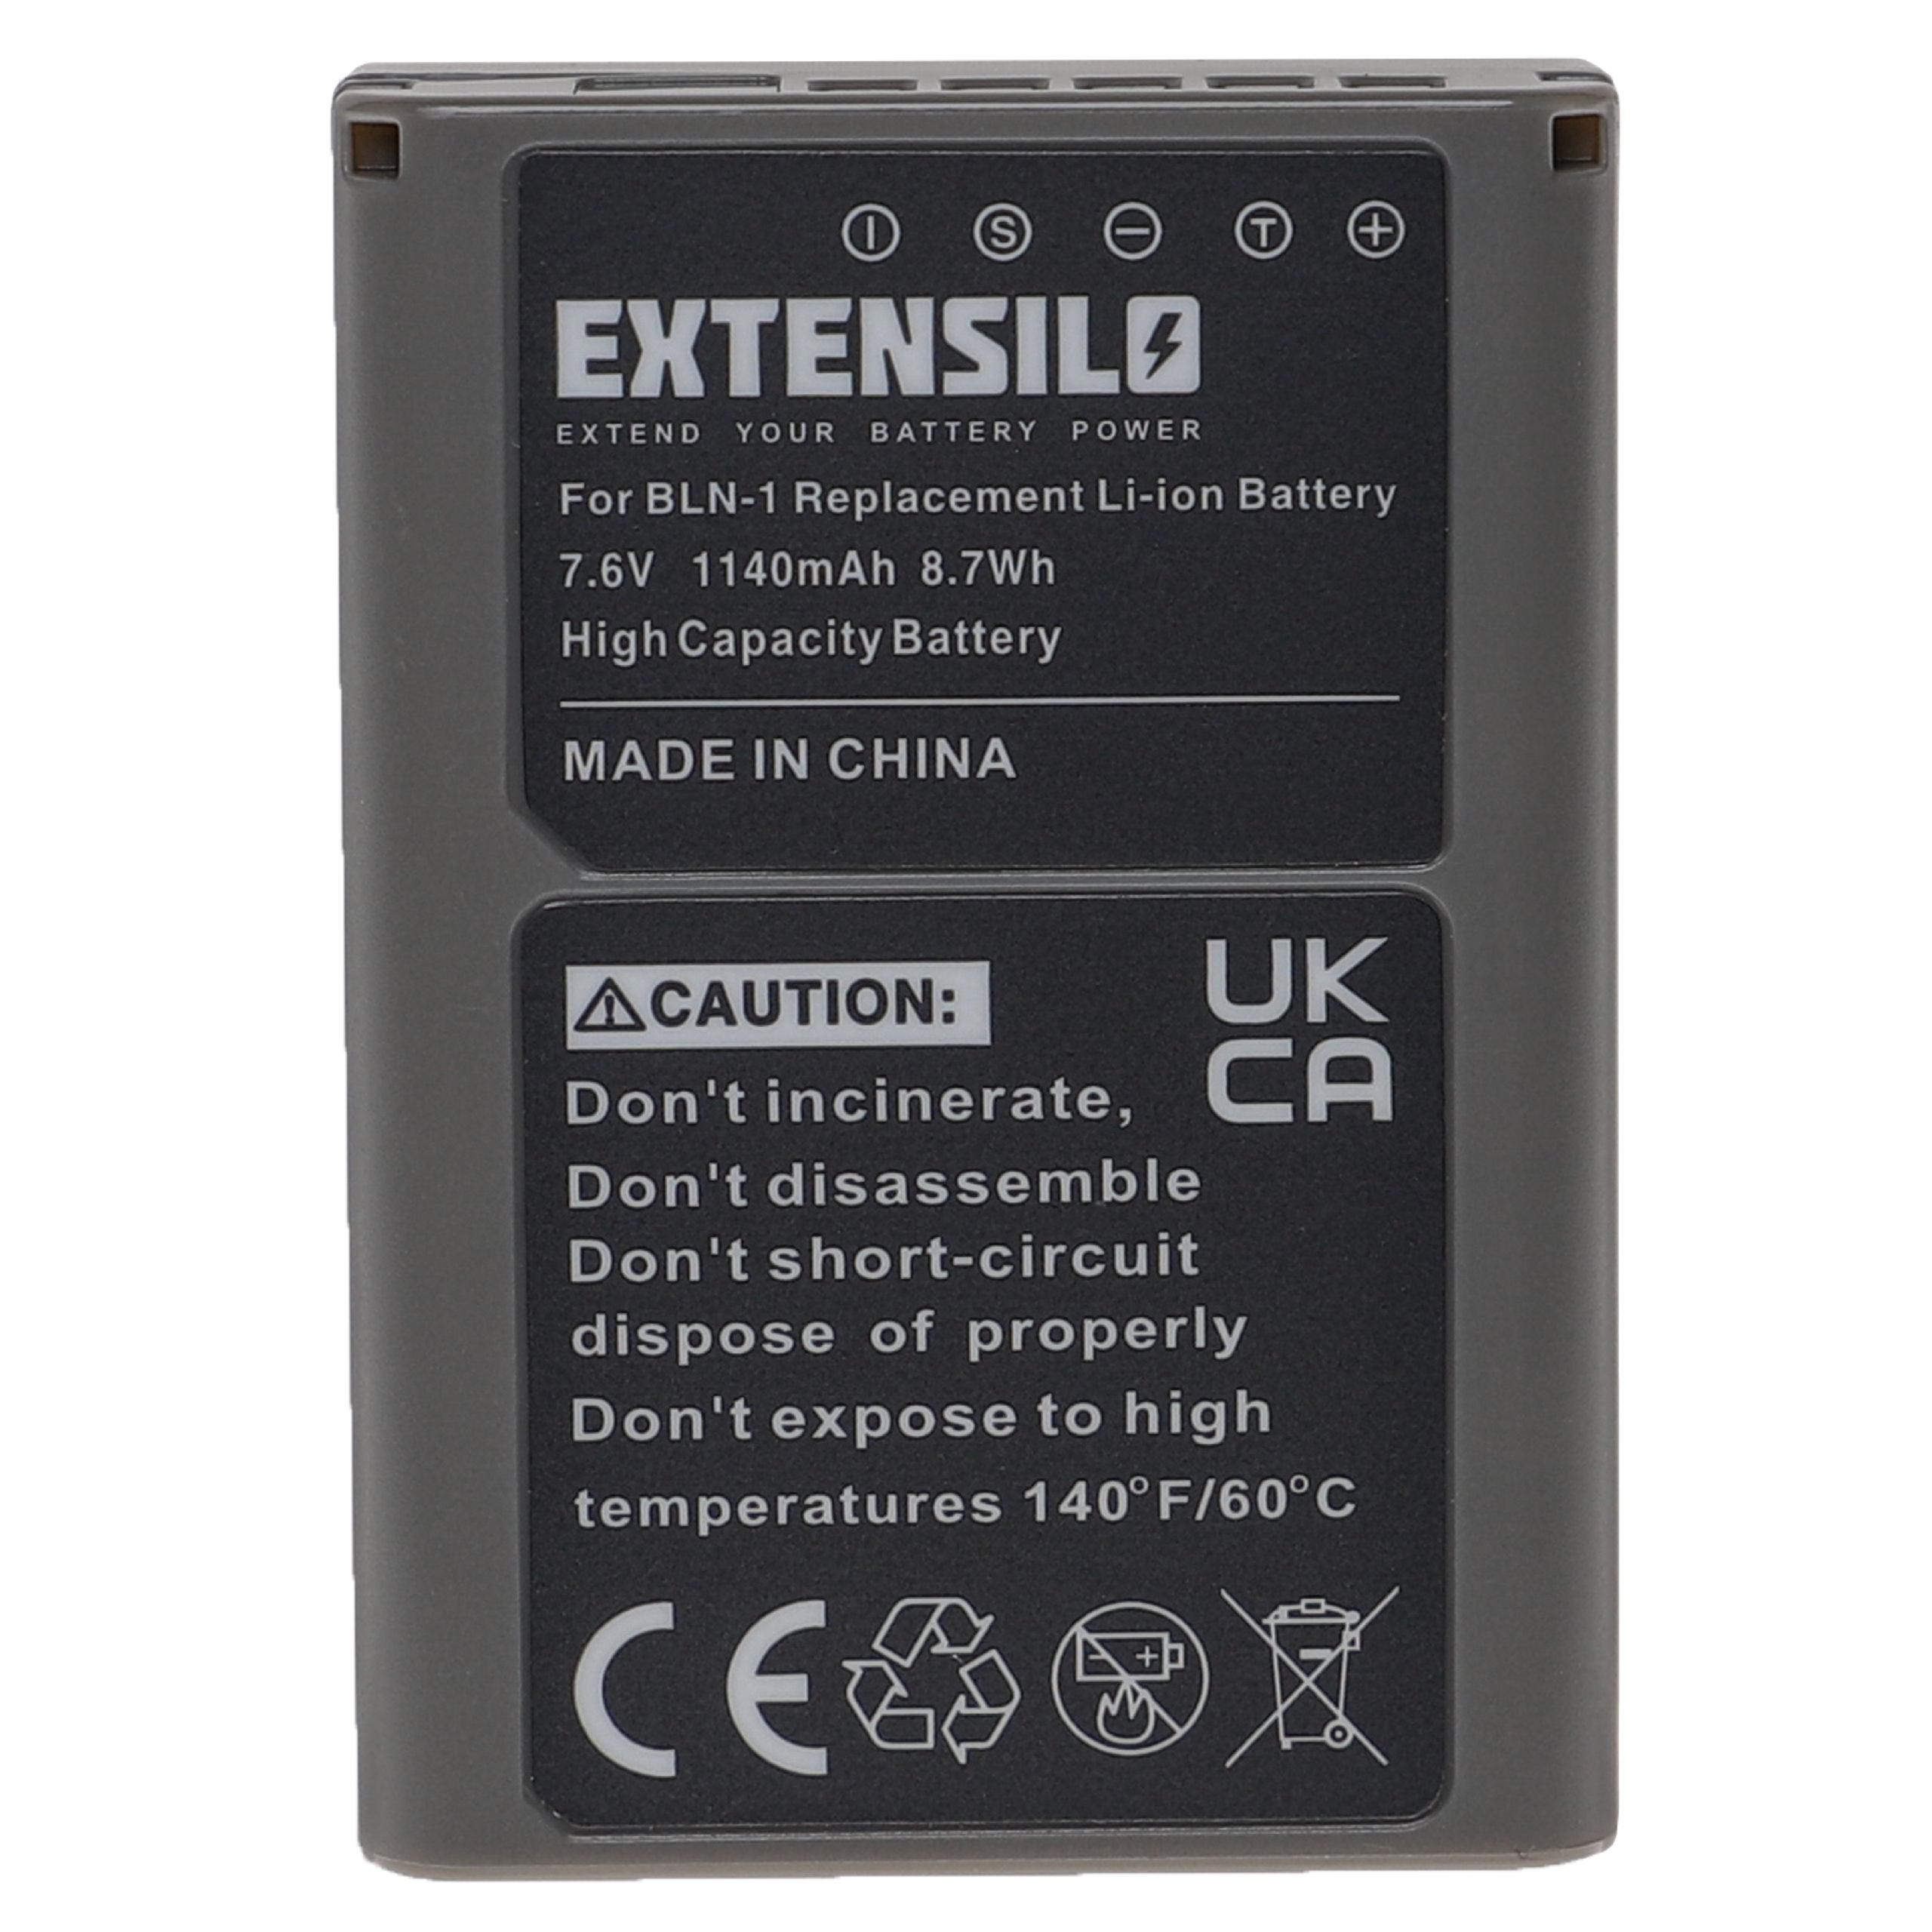 Battery Replacement for Olympus PS-BLN1 - 1140mAh, 7.6V, Li-Ion